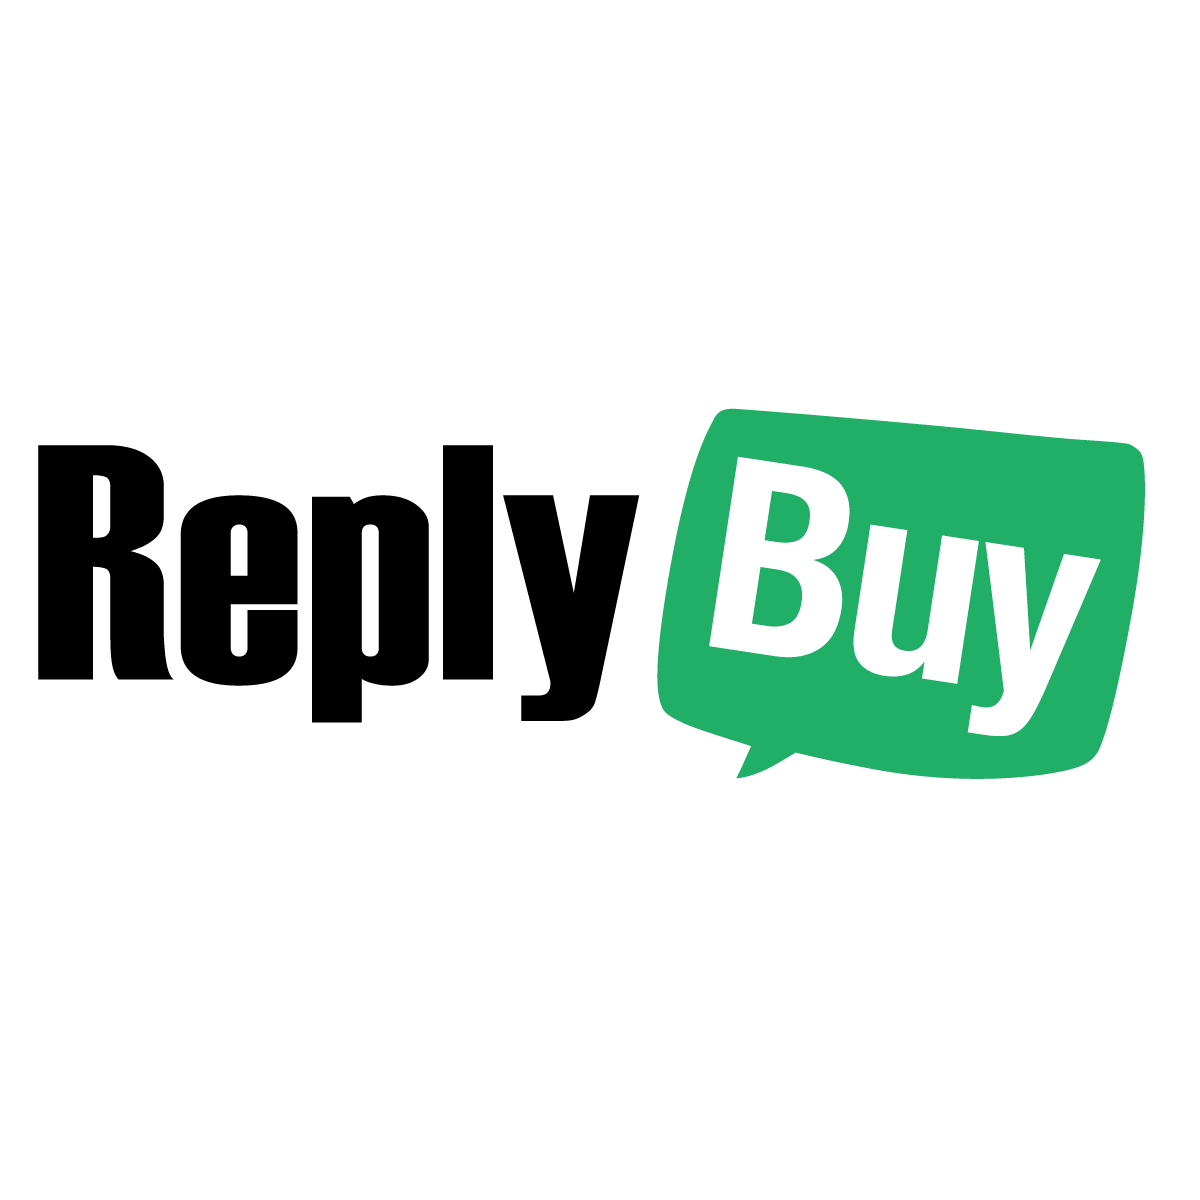 ReplyBuy HubSpot Integration | Connect Them Today